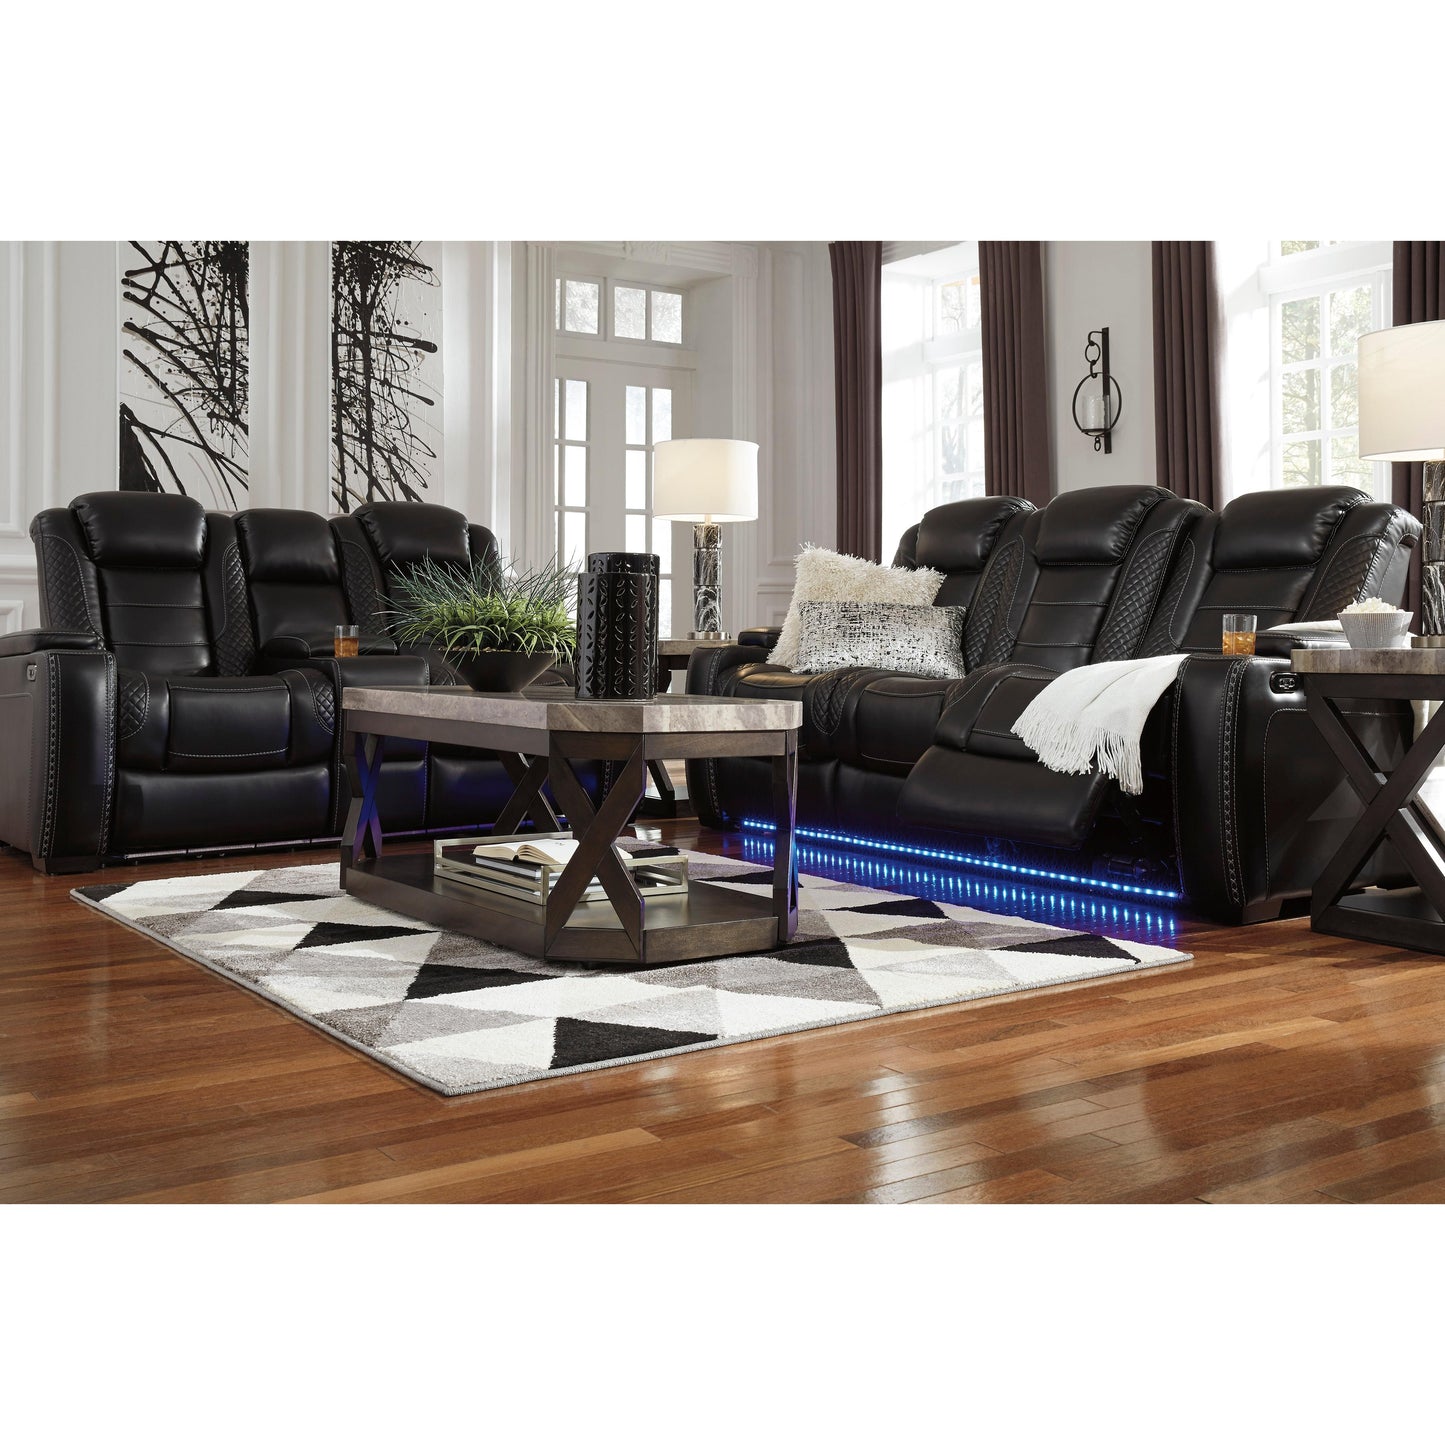 Signature Design by Ashley Party Time Power Reclining Leather Look Sofa 3700315